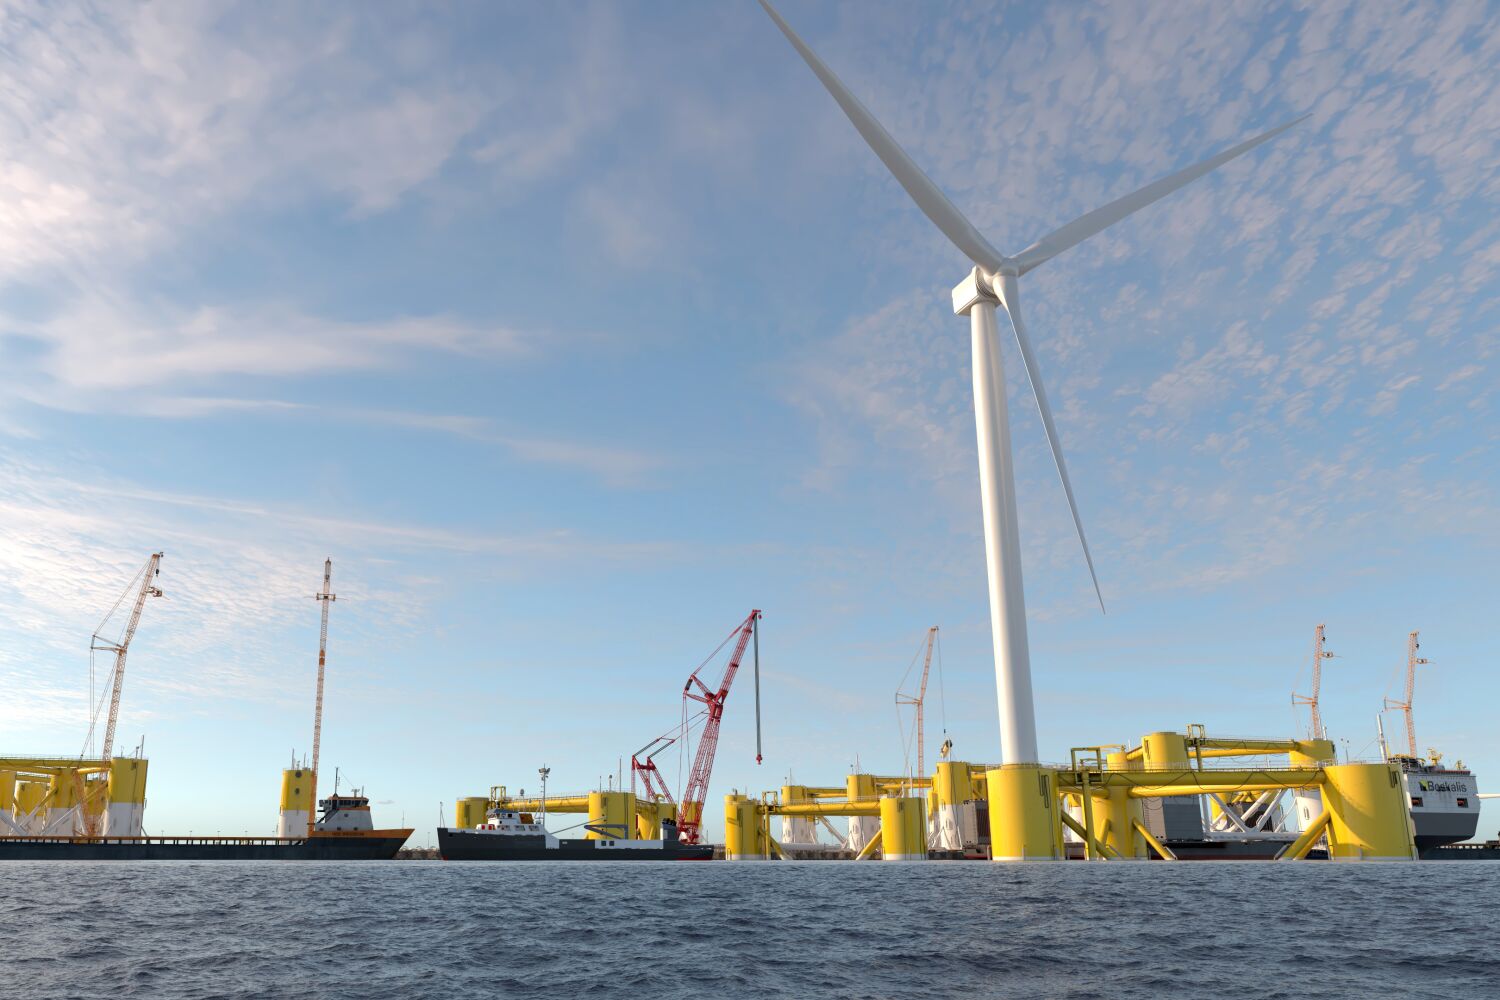 Long Beach releases plan for largest offshore wind turbine facility at any U.S. port